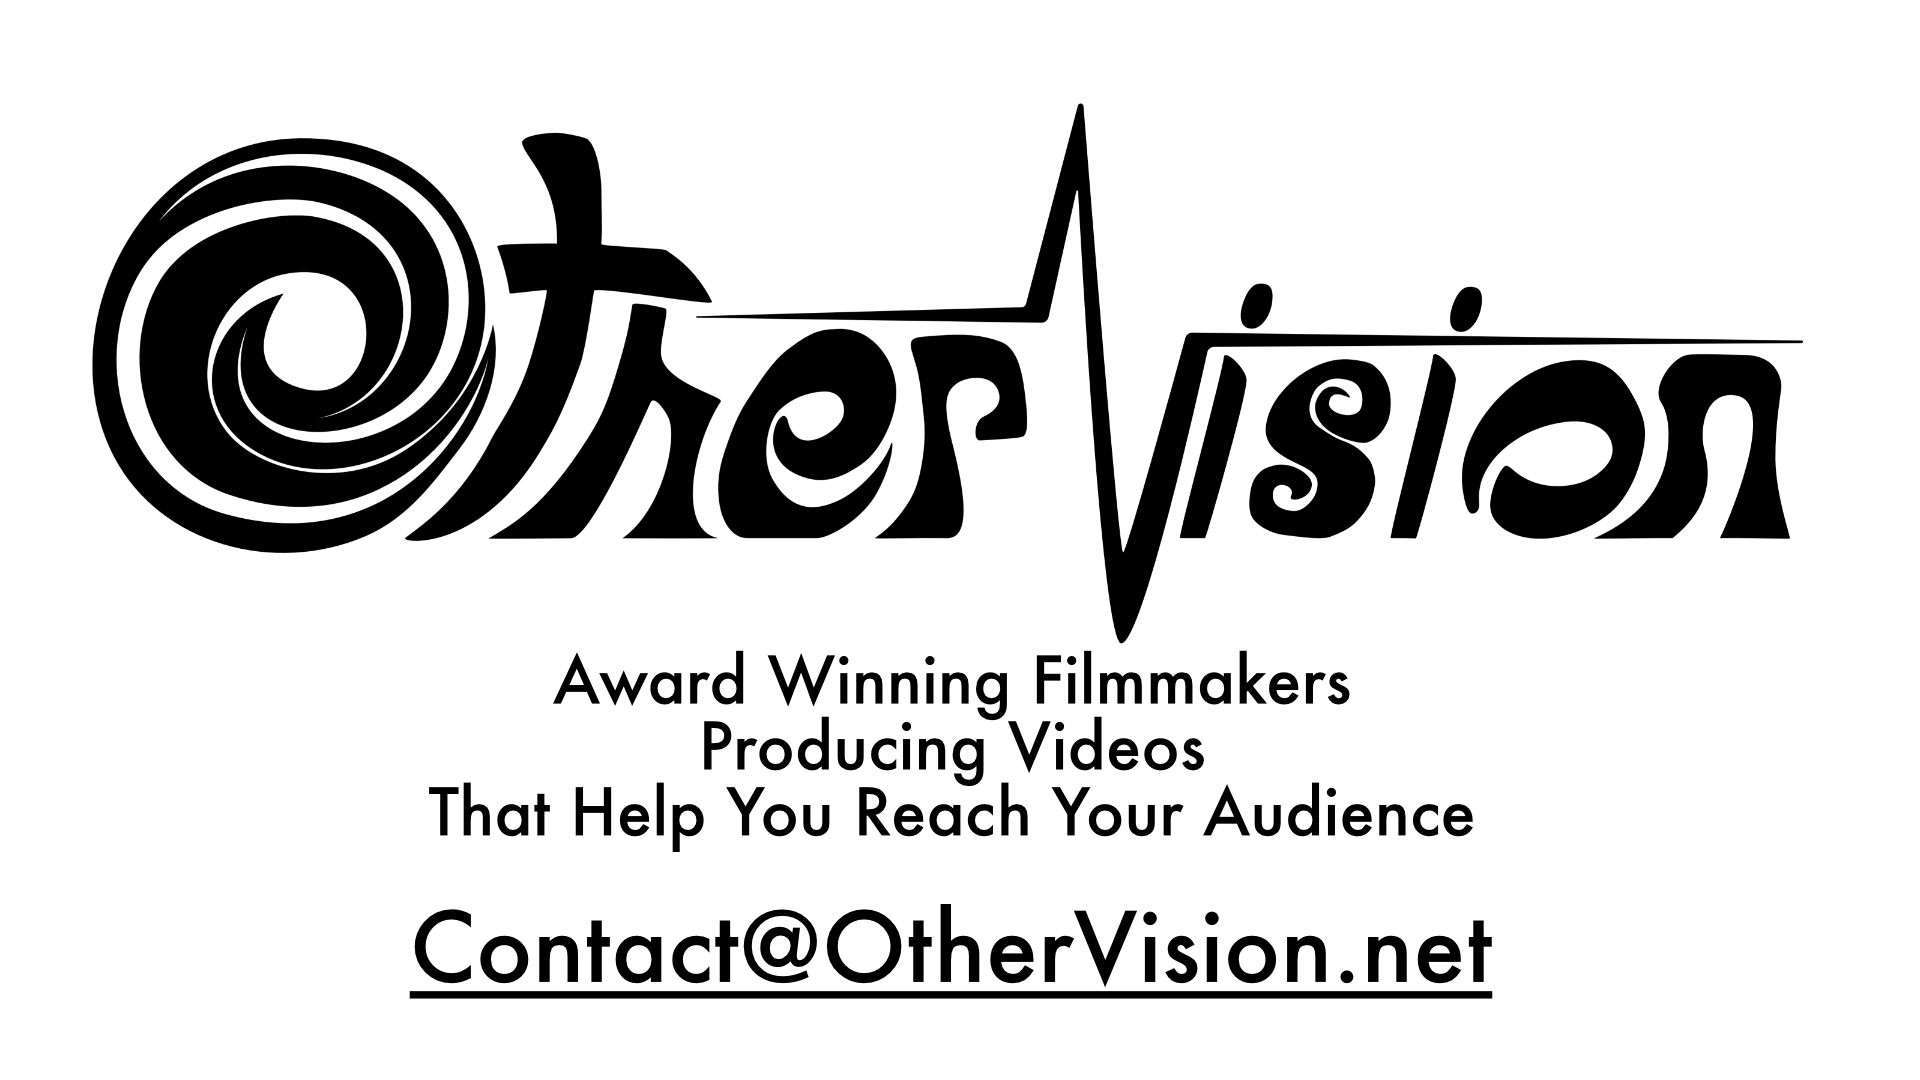 Other Vision